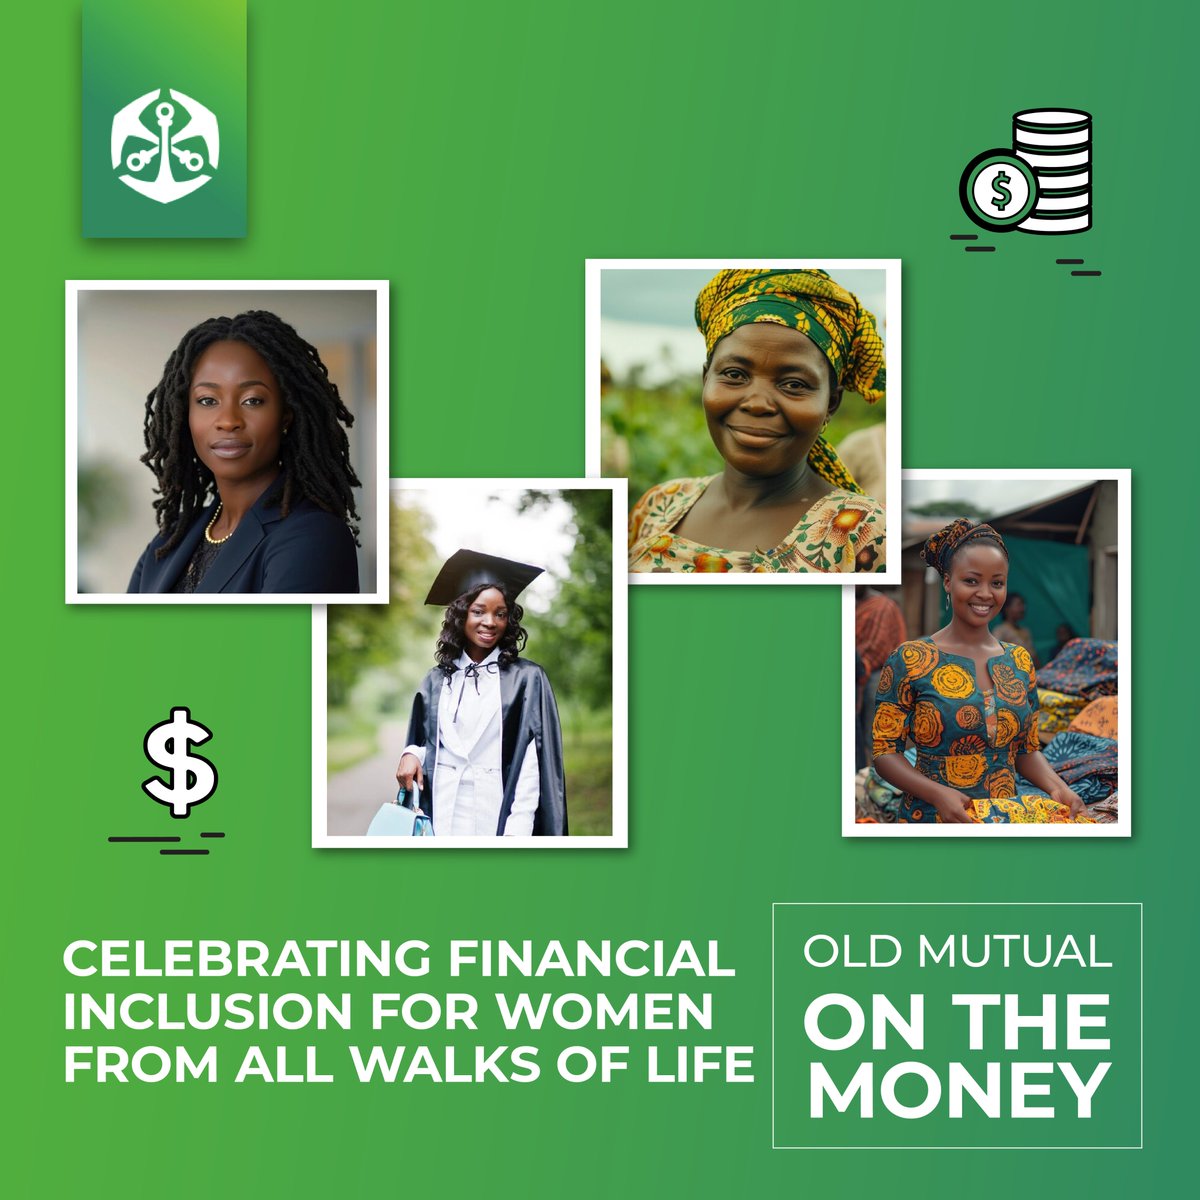 Our aim is for every woman to be included in the financial landscape. We’ll keep doing whatever it takes to inspire inclusion. #onthemoney #oldmutualzimbabwe #inspireinclusion